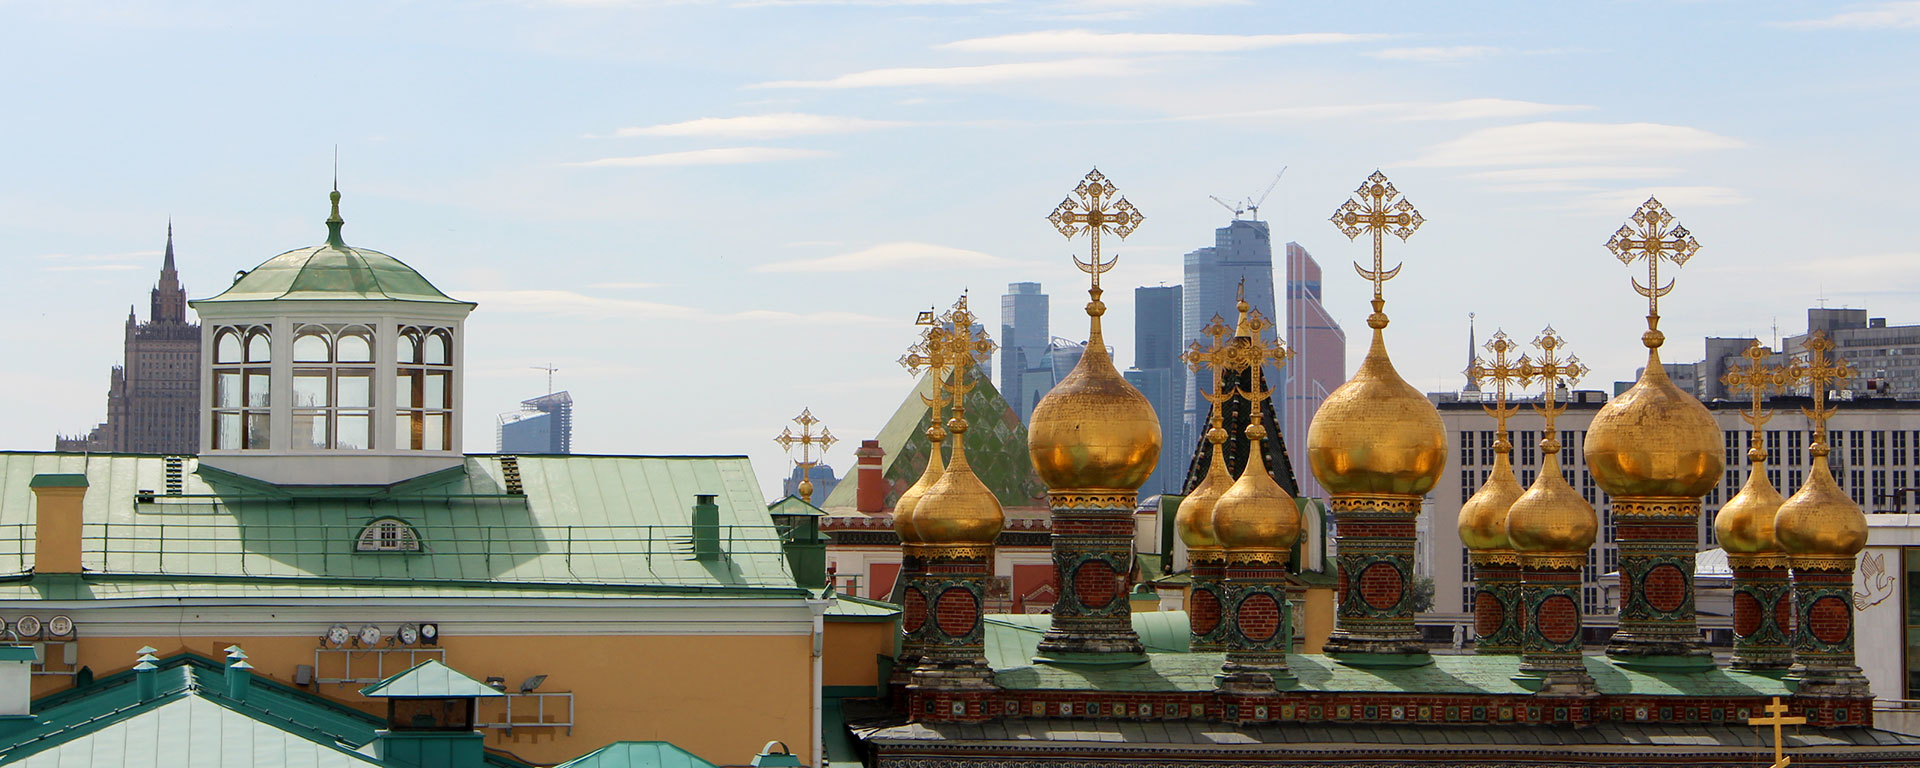 Skyline showing tops of buildings in old and new Moscow